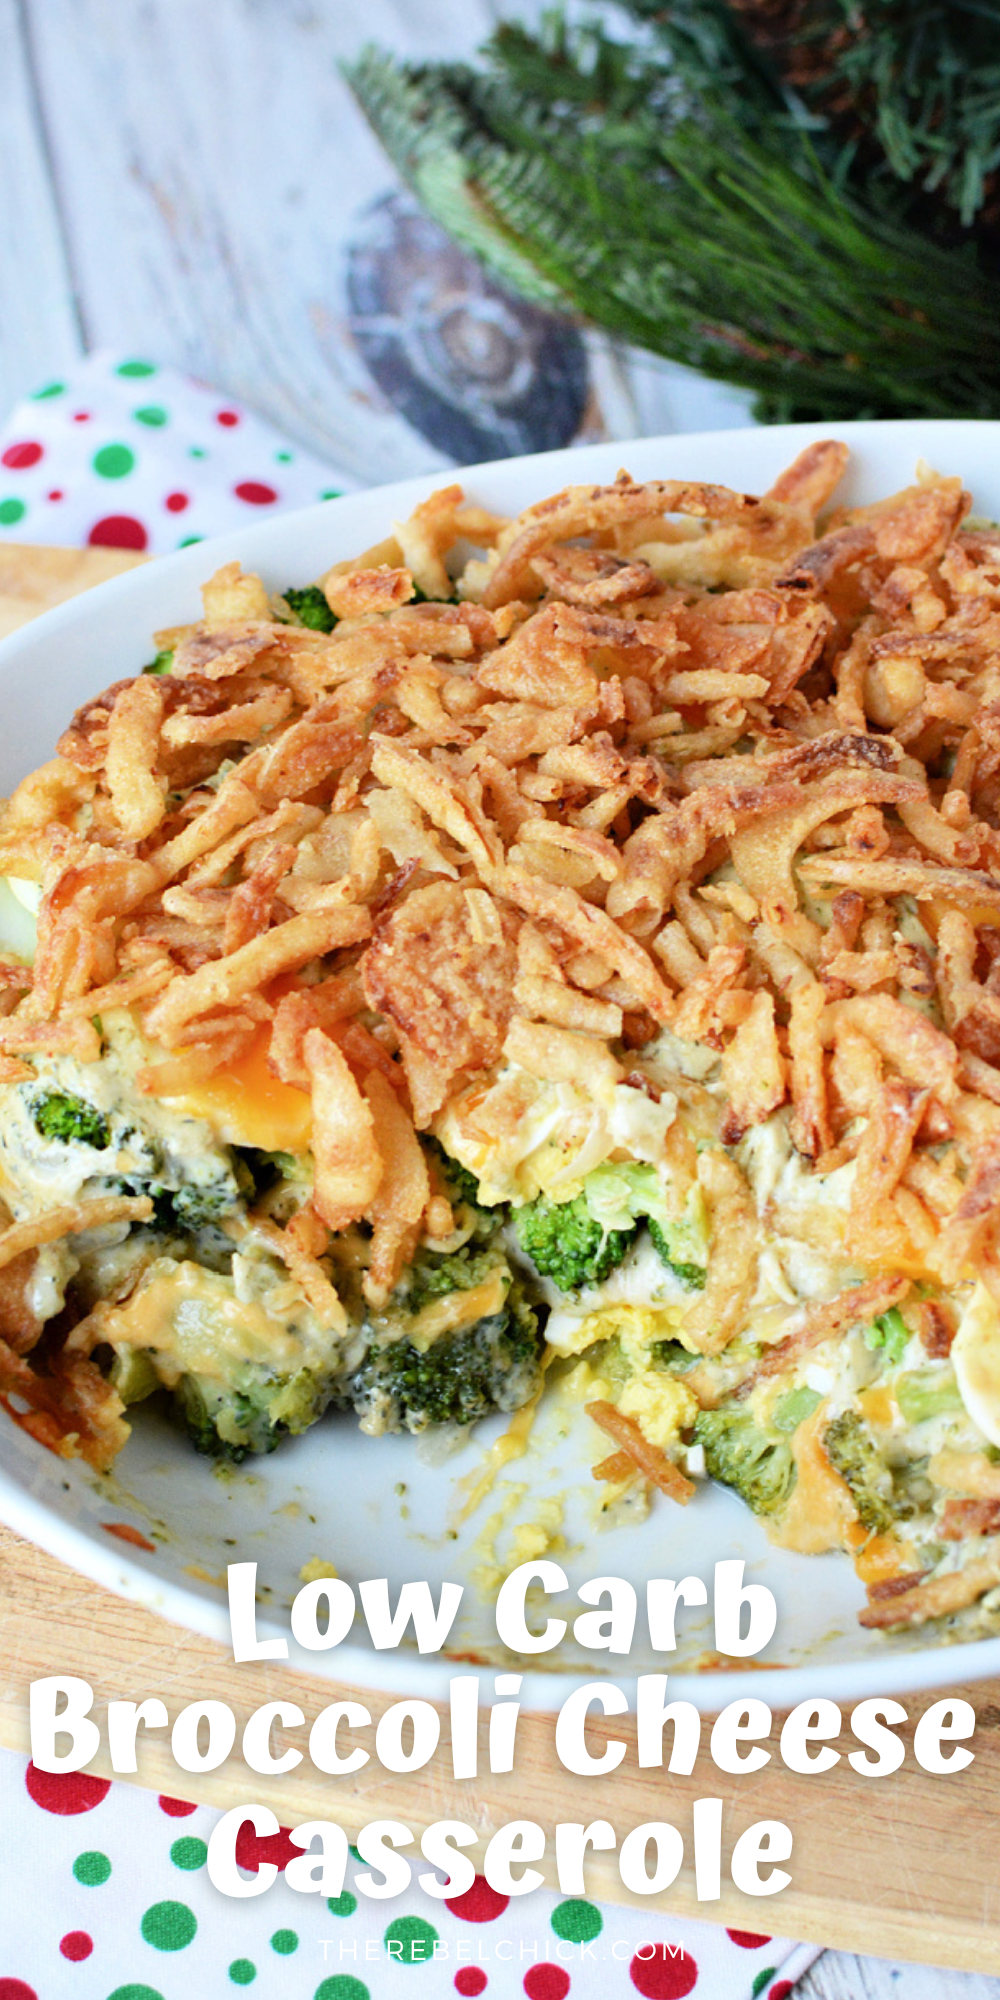 How to Make a Low Carb Broccoli Cheese Bake Recipe